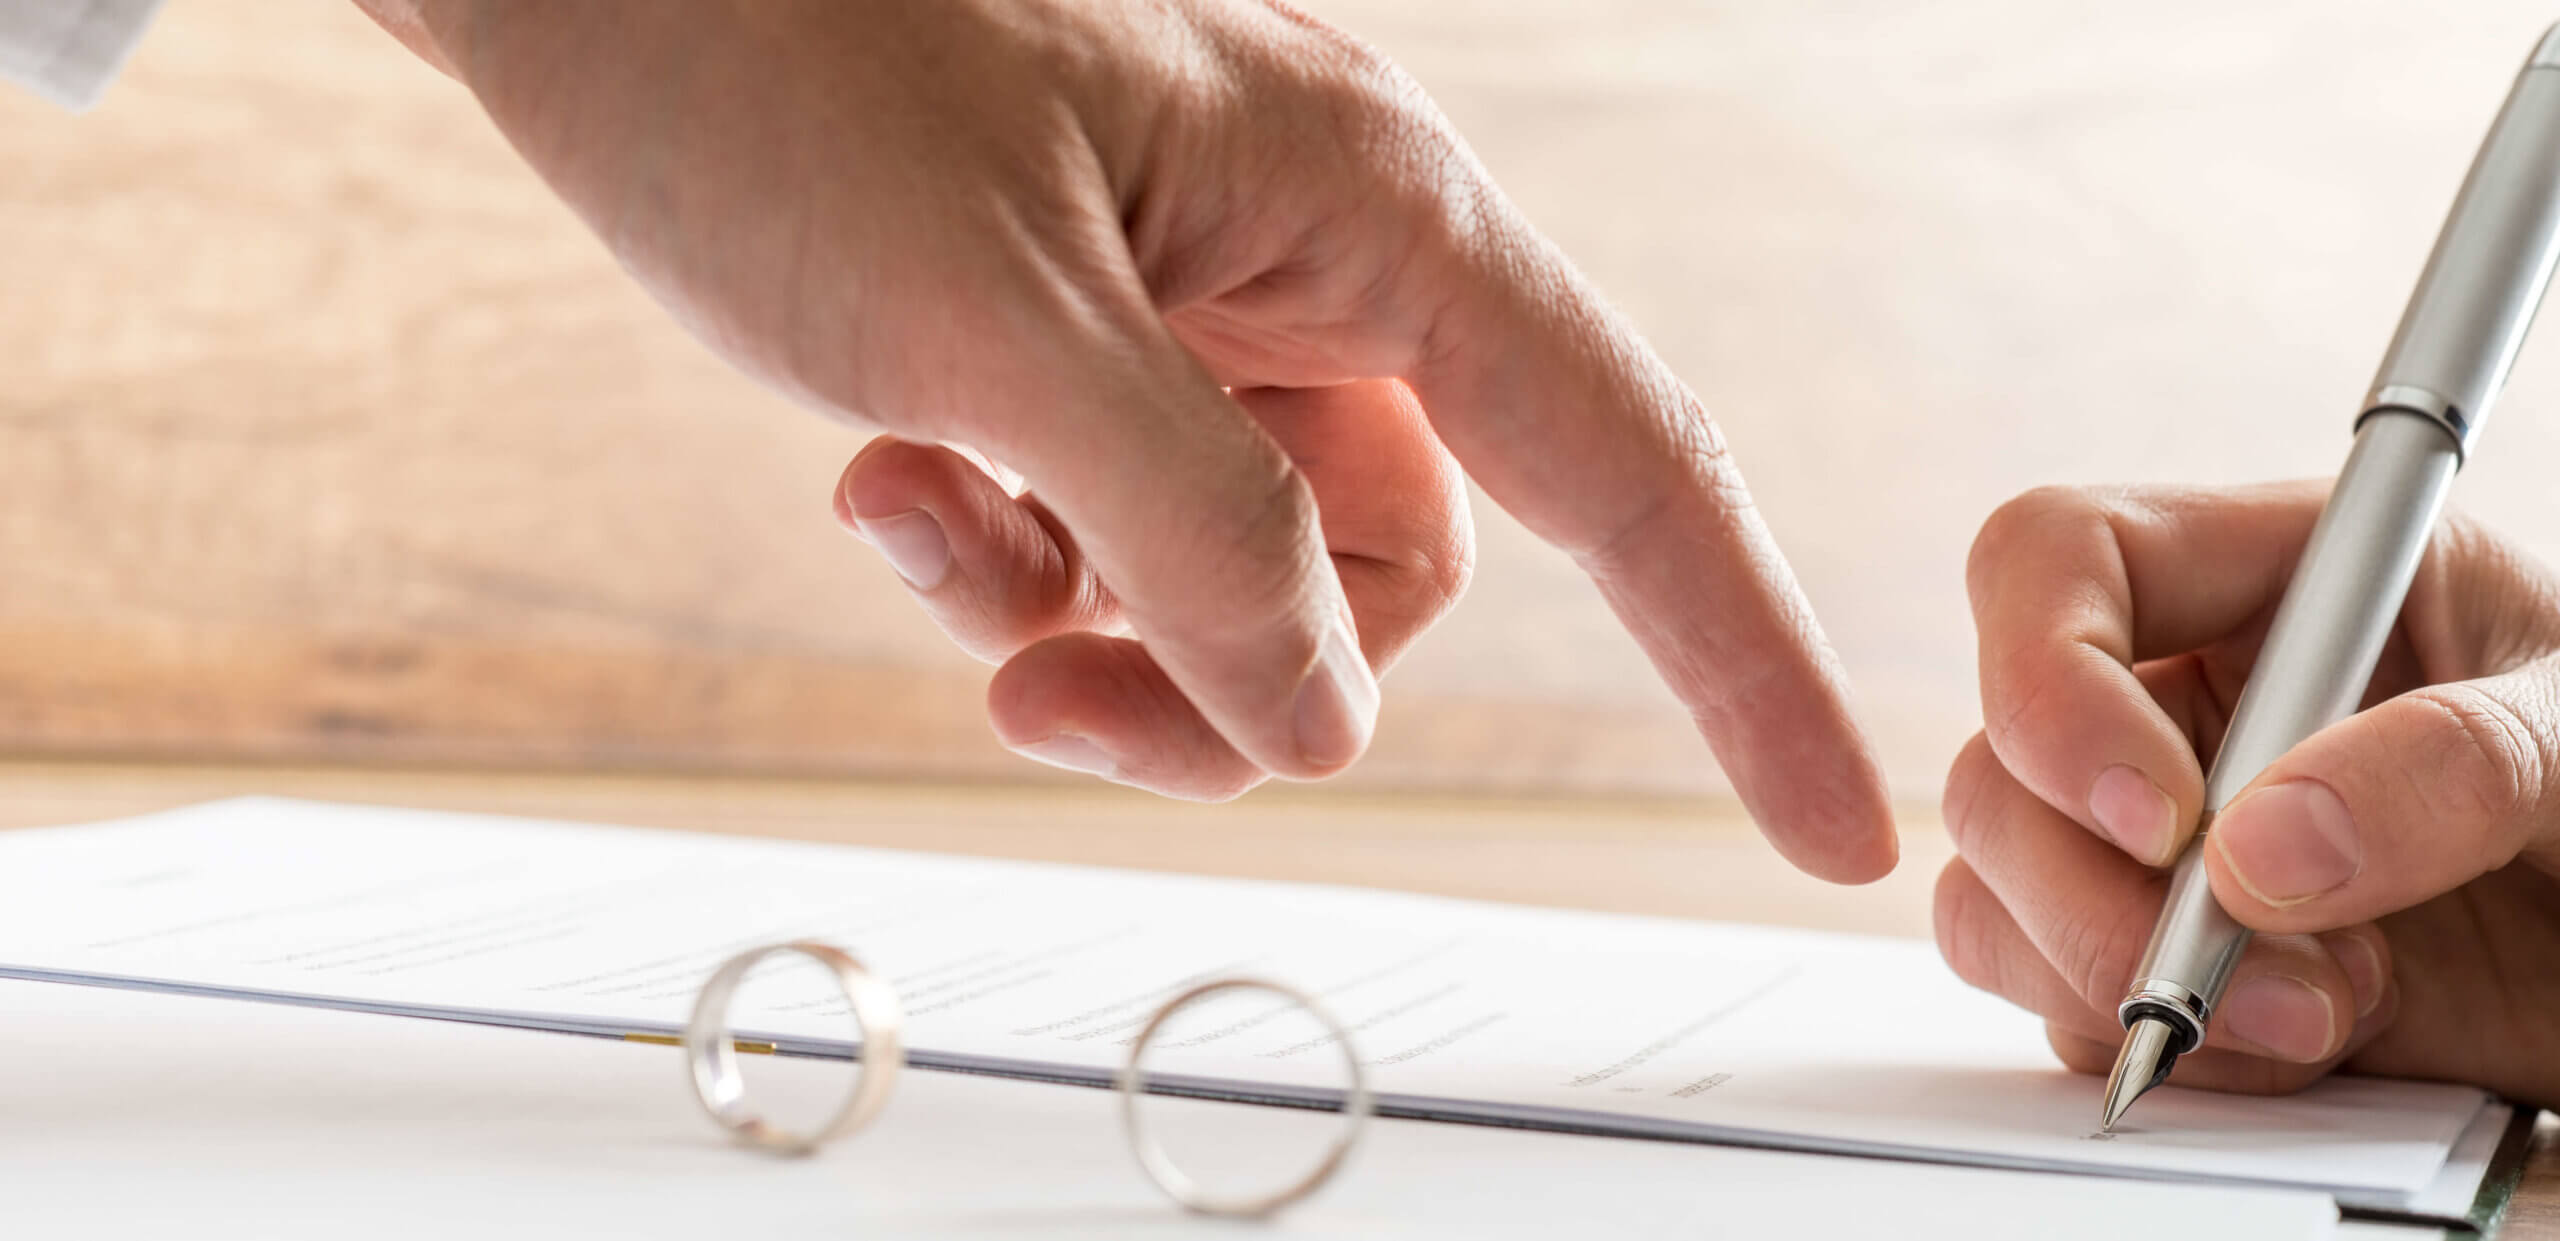 Male hand pointing to a divorce paper